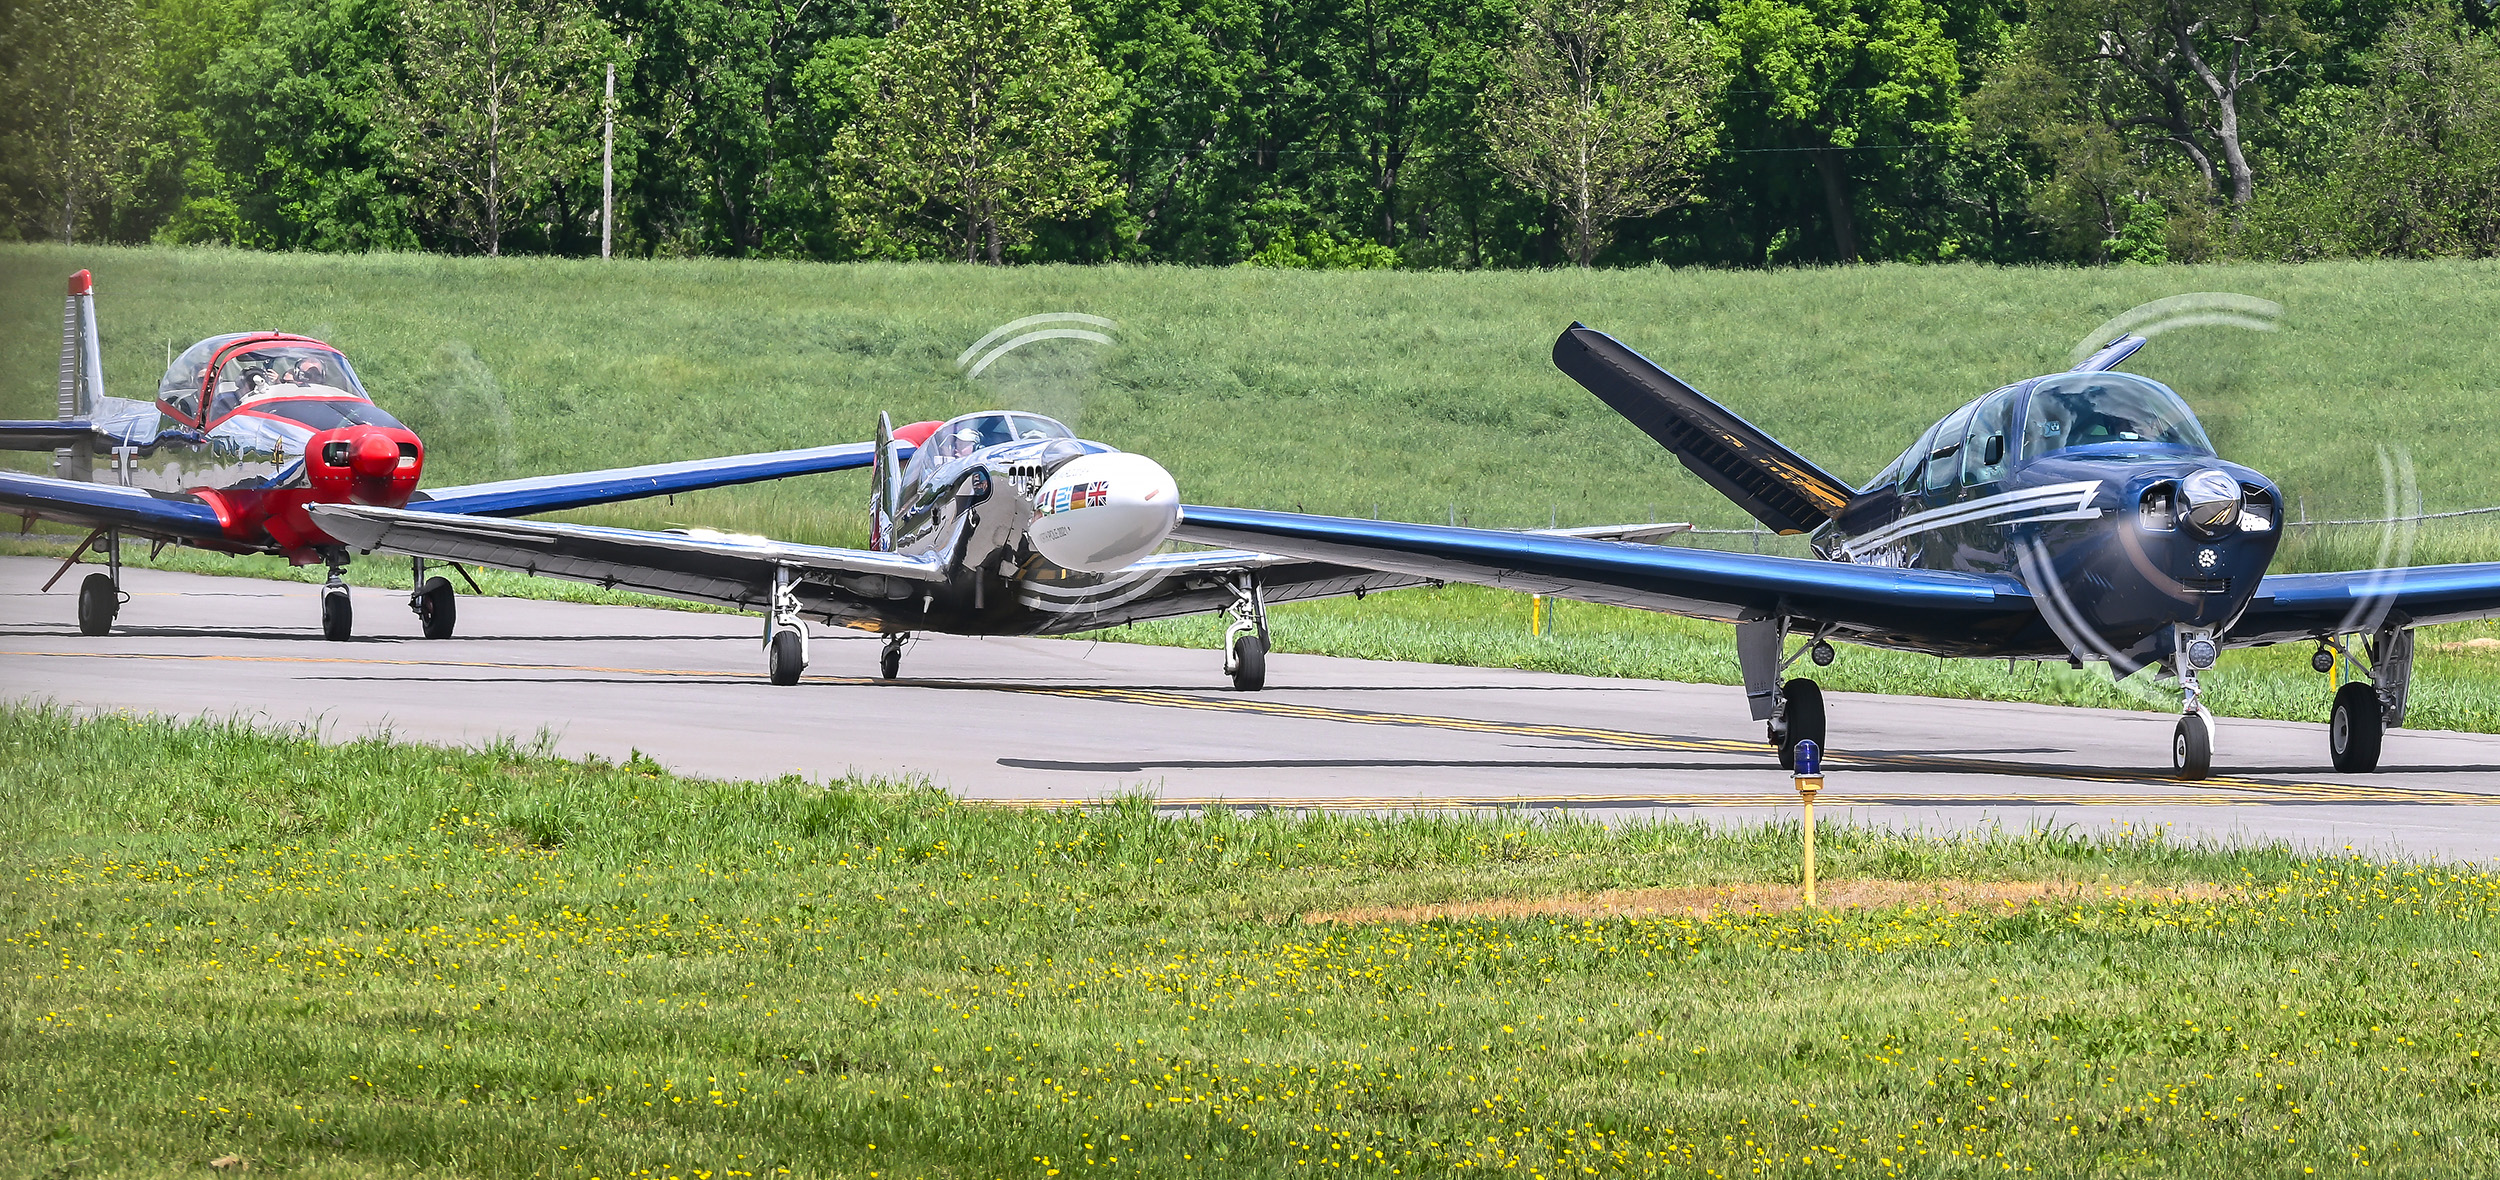 Earthrounder Adrian Eichhorn in a Beechcraft Bonanza, right, leads the way to the runway at Frederick Municipal Airport in Maryland. Photo by David Tulis.